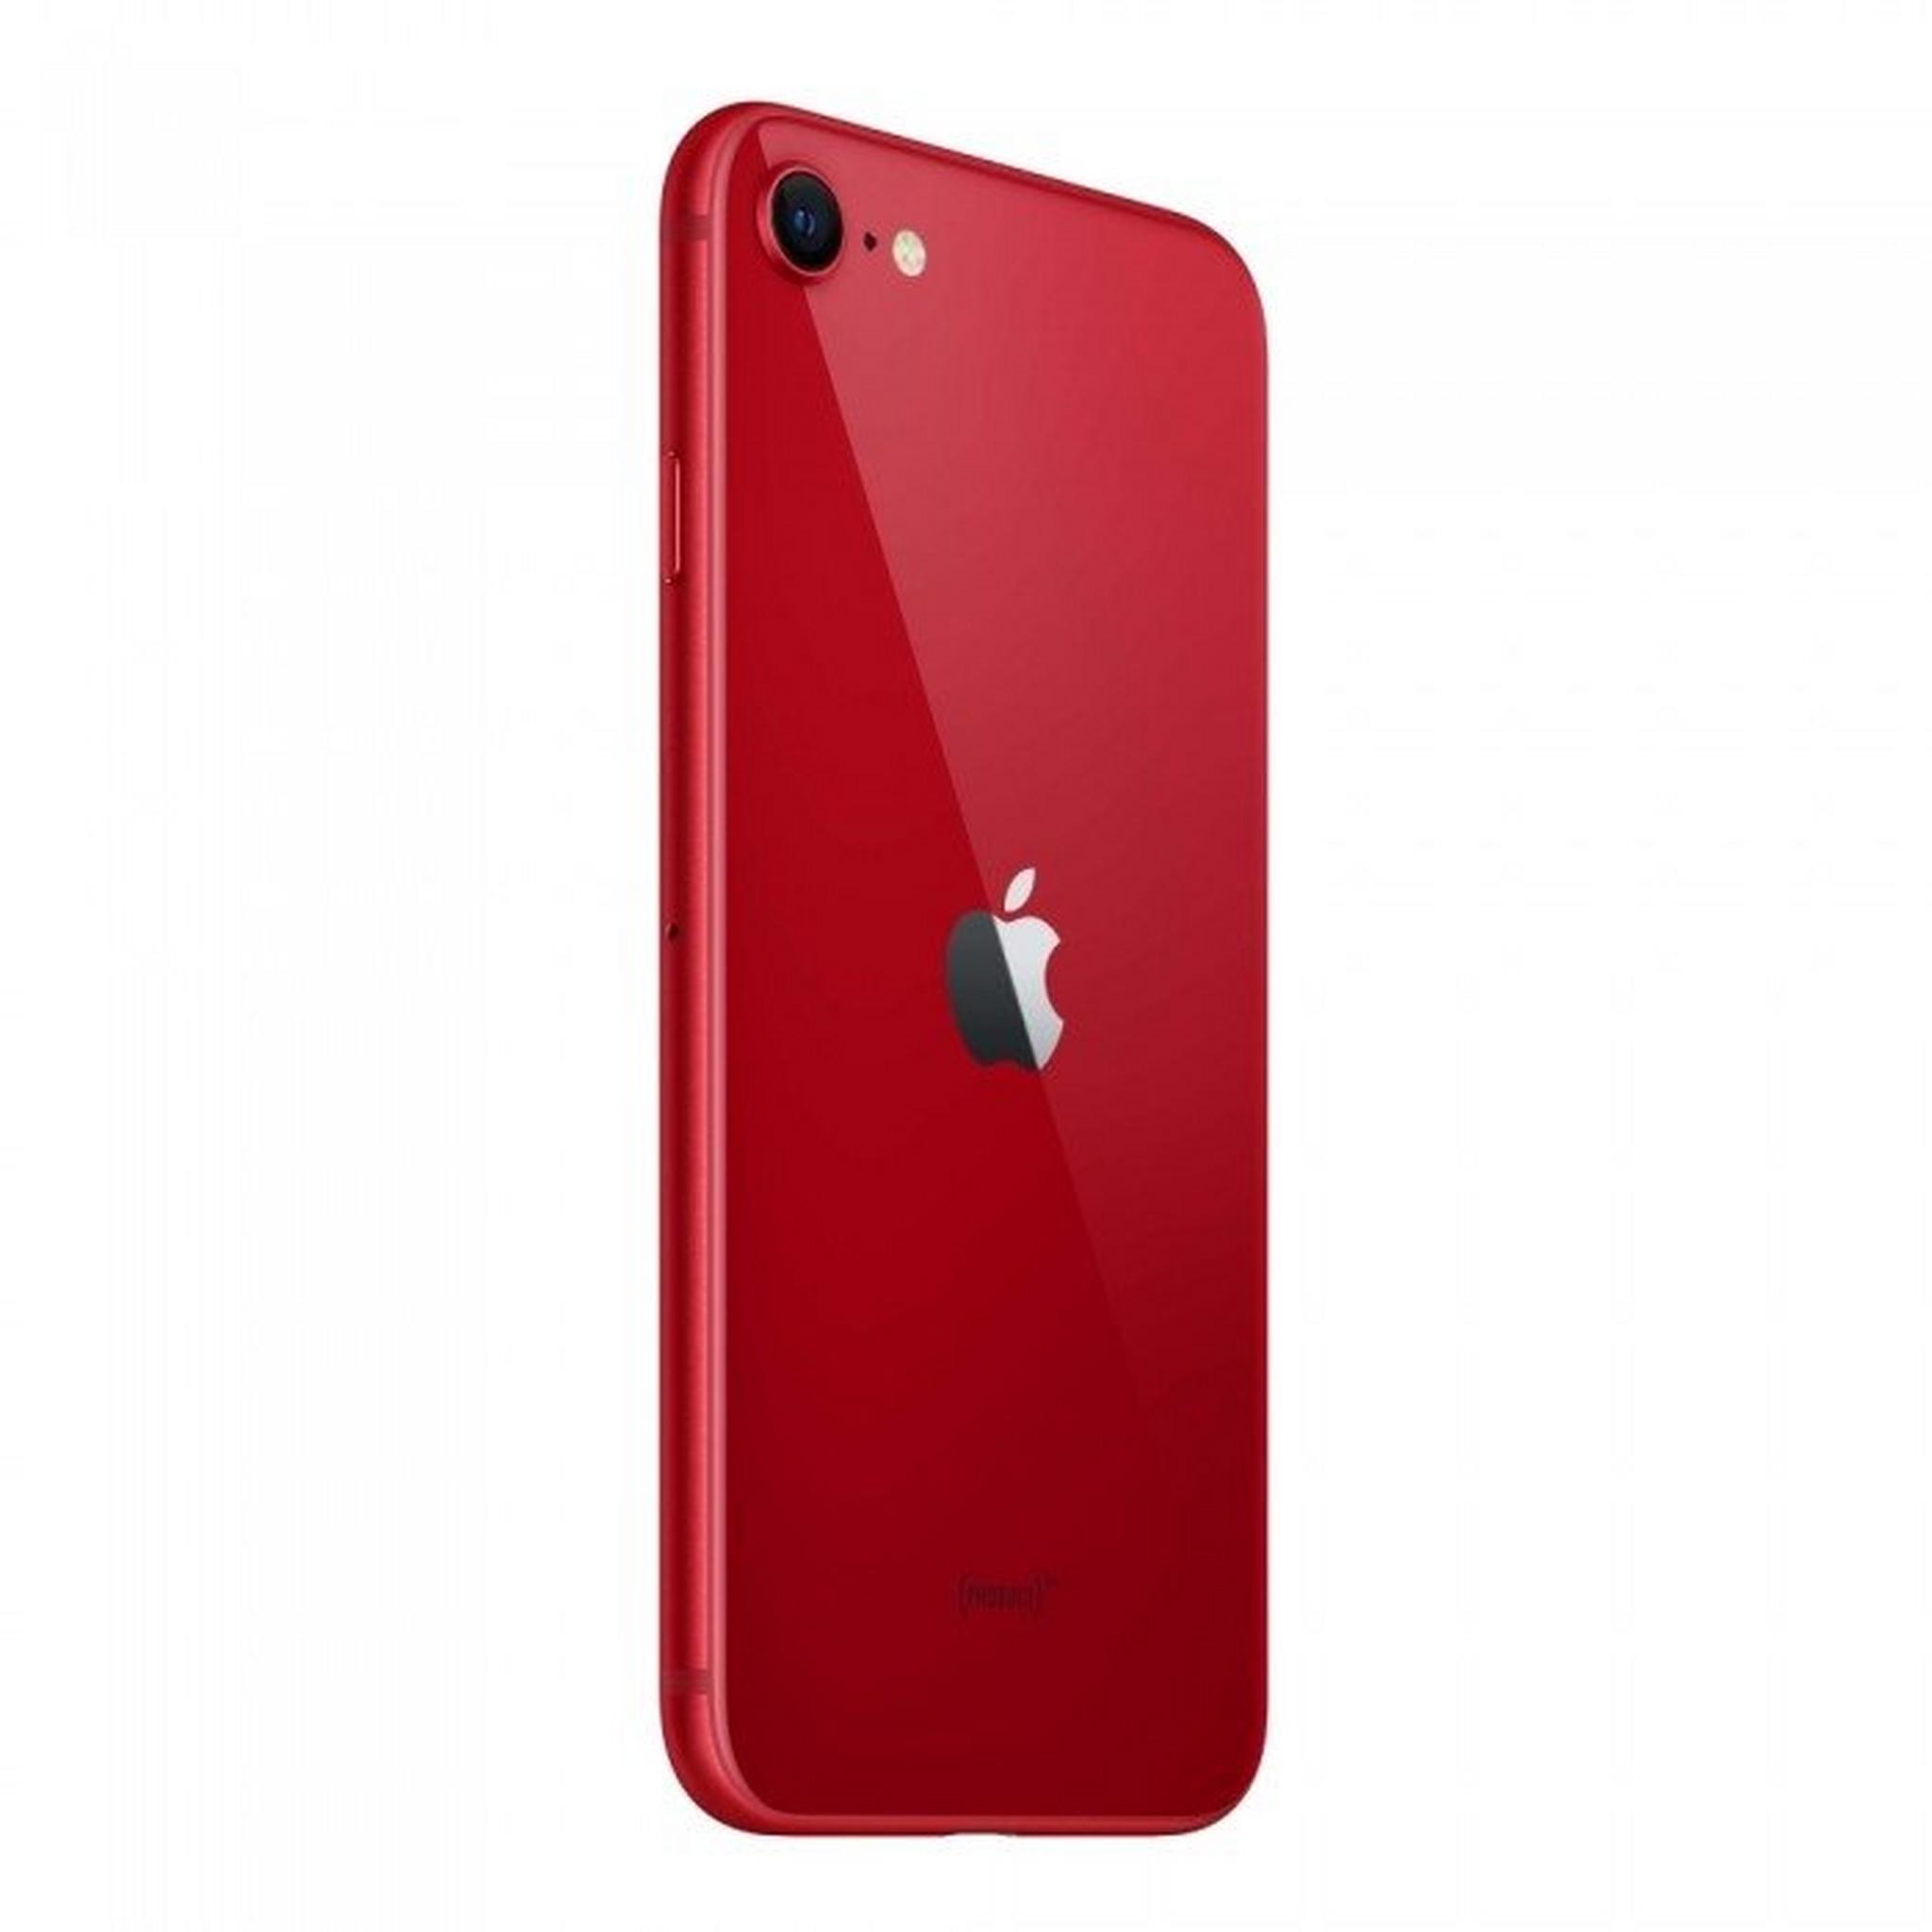 Apple iPhone SE 3rd Gen 256GB - (PRODUCT)RED